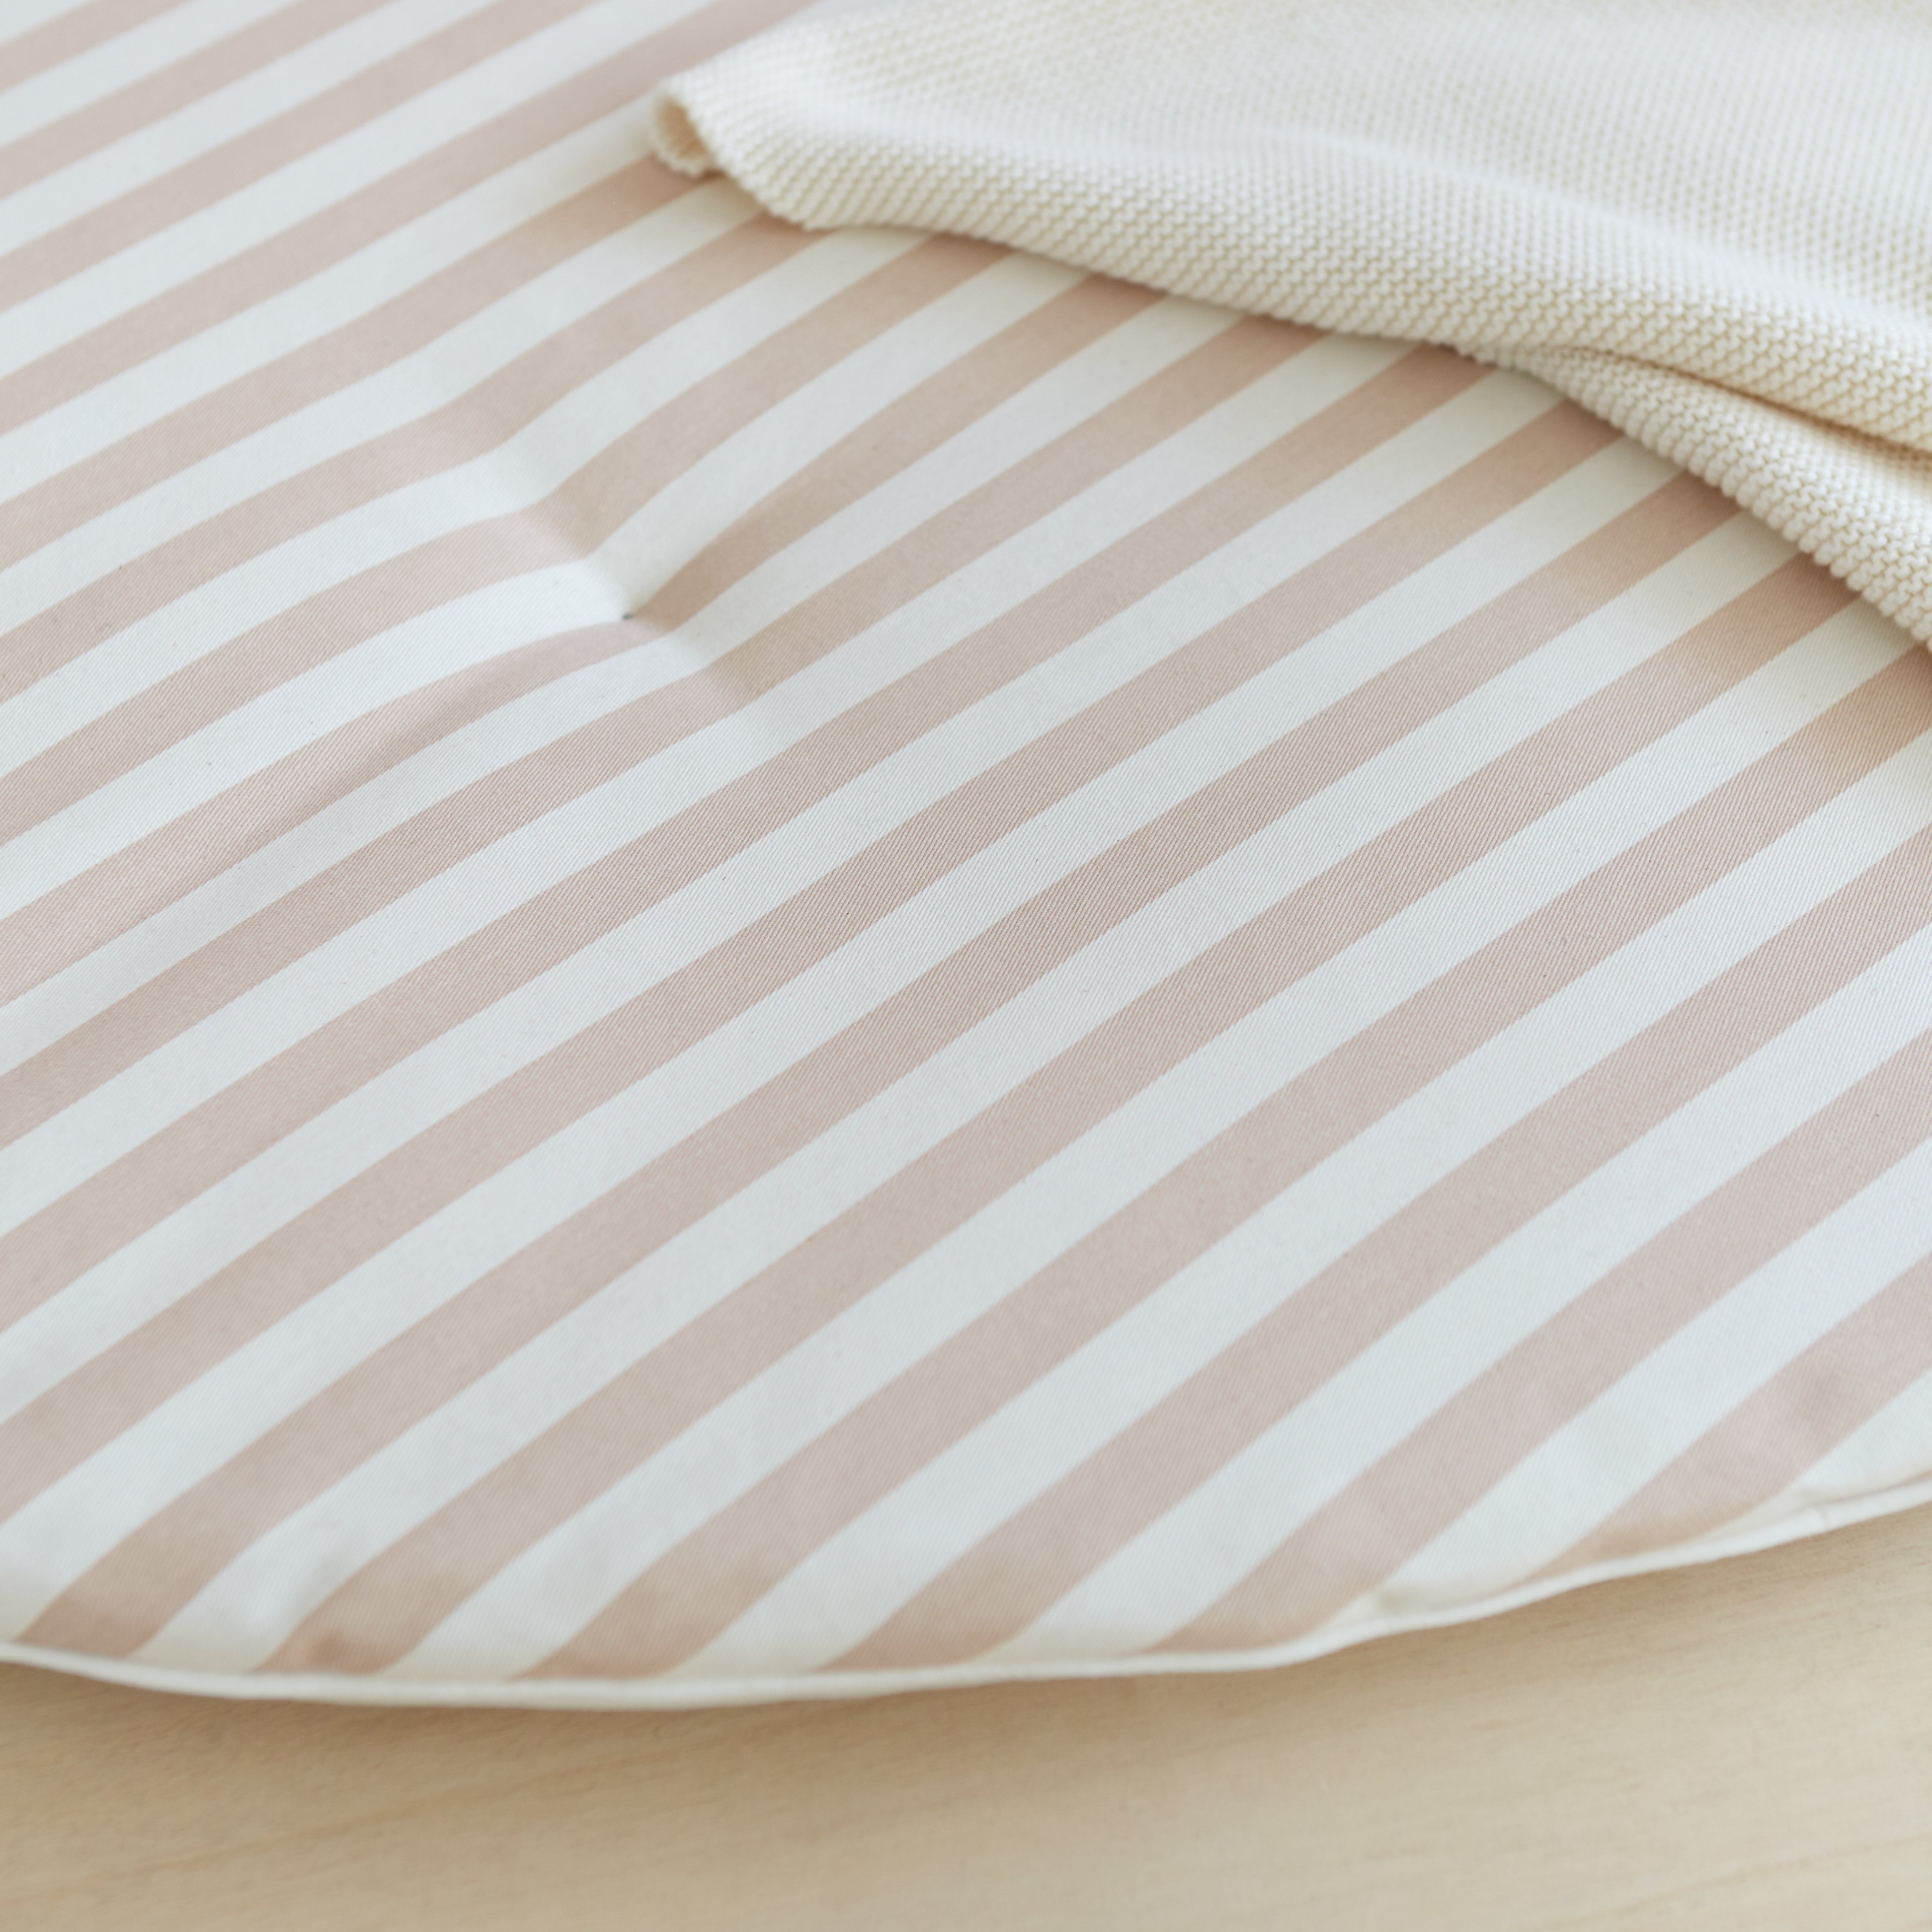 Nobodinoz Fluffy Round Playmat in Taupe Stripes Details